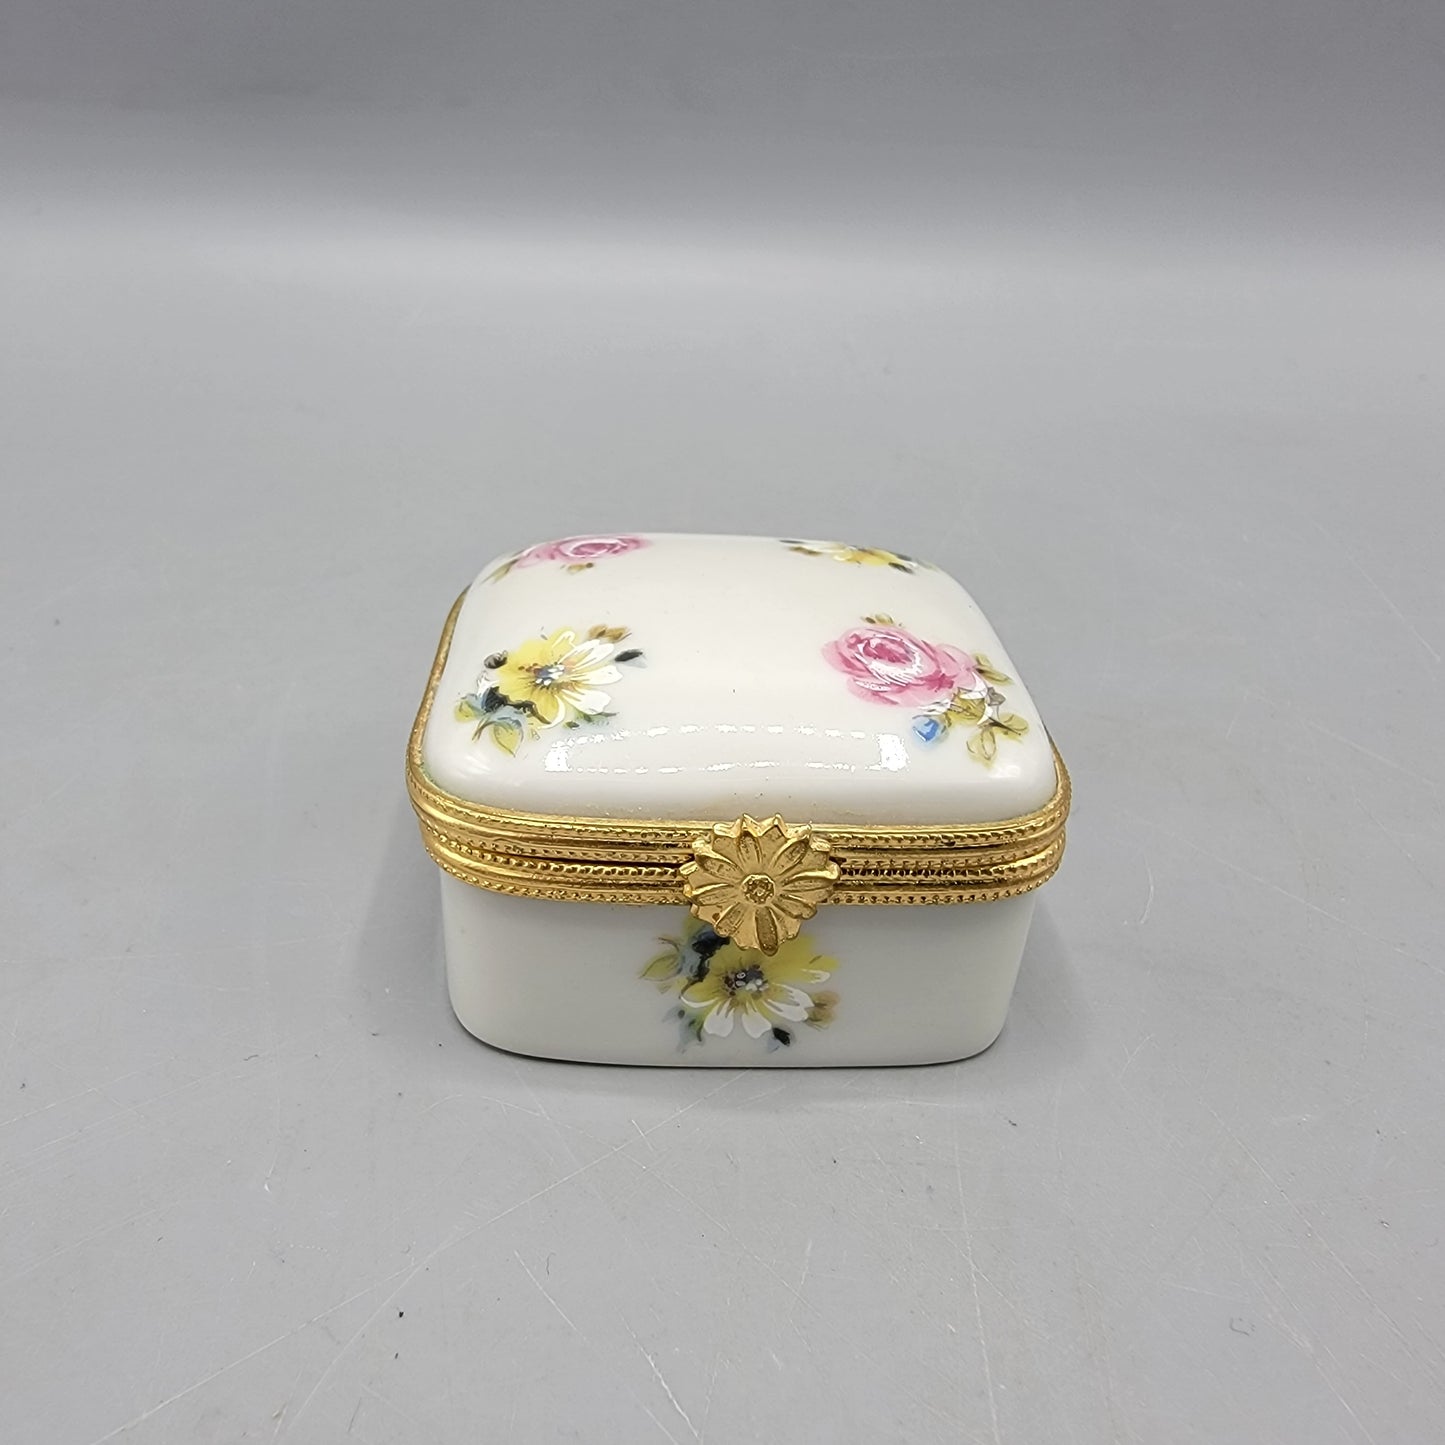 Square Limoges Porcelain Box with Handpainted Flowers